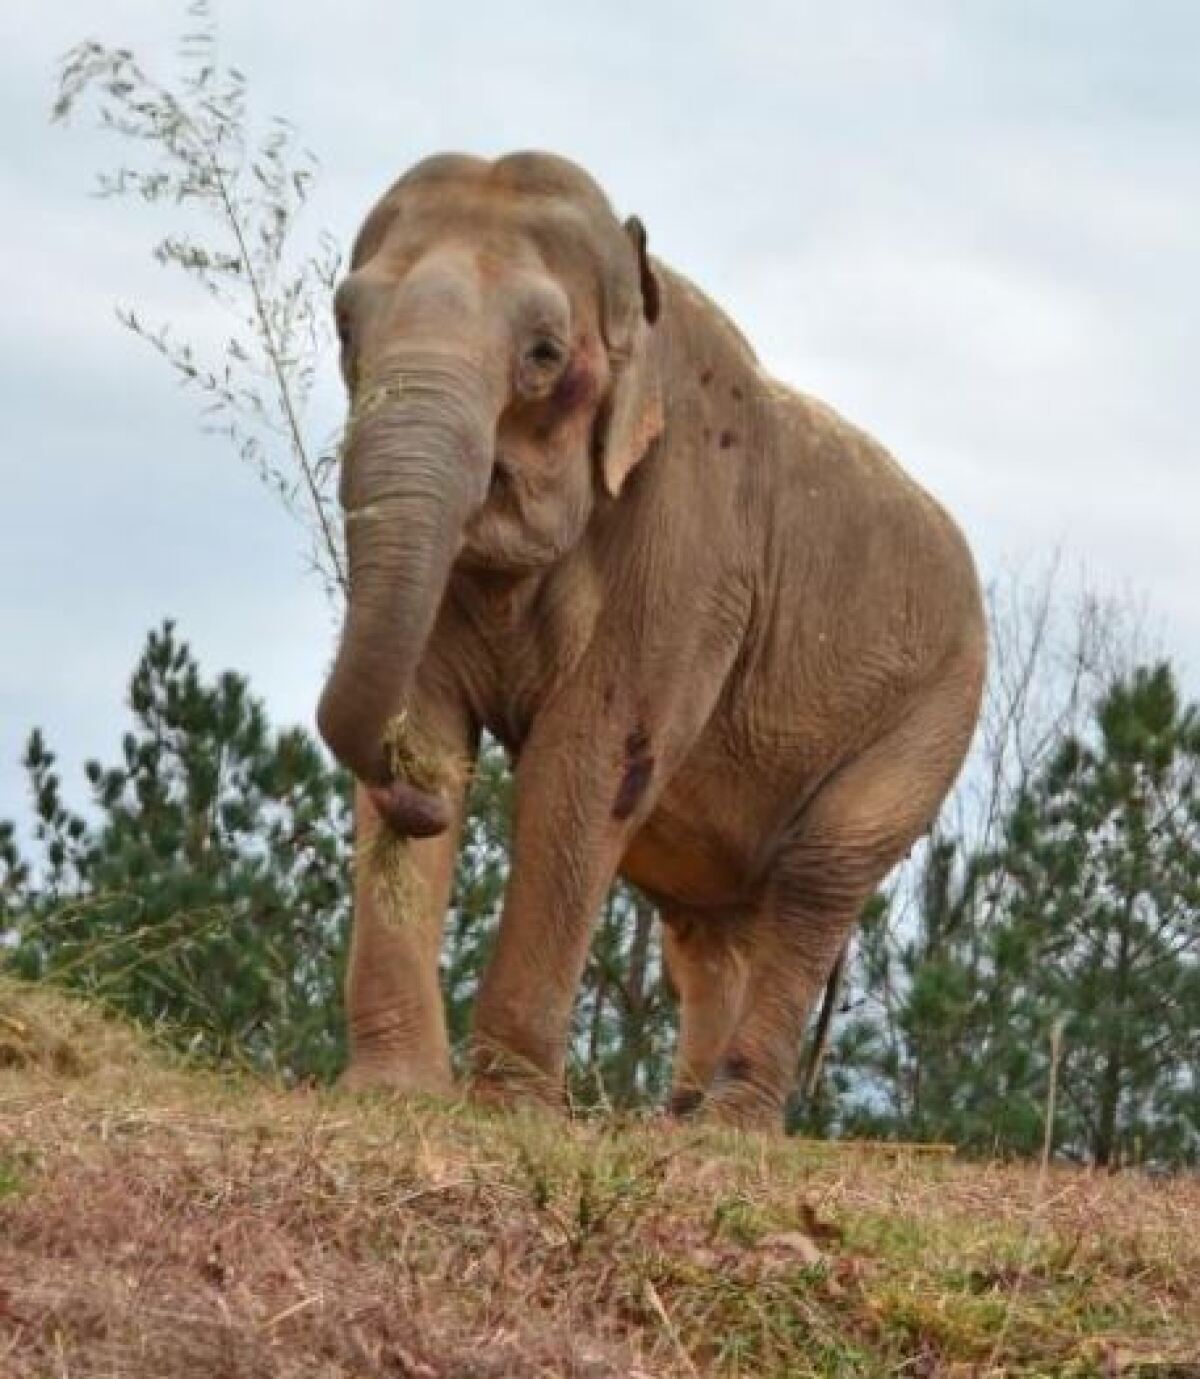 Inga considers the best gift she ever gave a child was to "adopt" for her granddaughter an Asian elephant named Shirley.